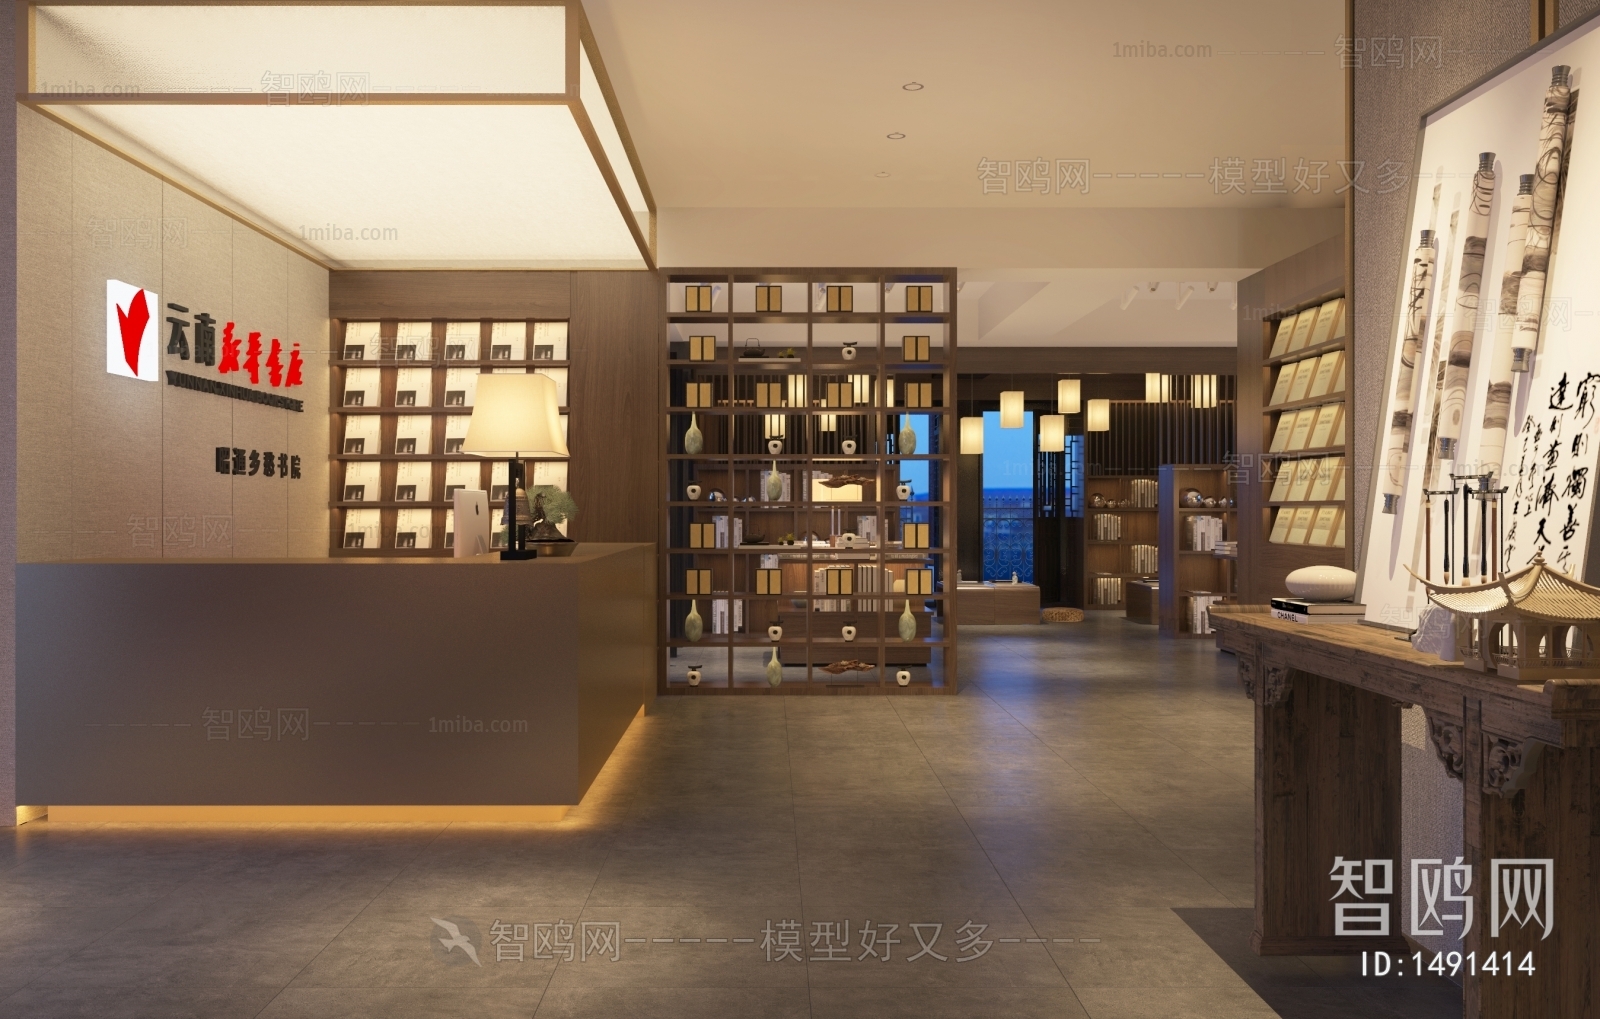 New Chinese Style Bookstore Book Bar